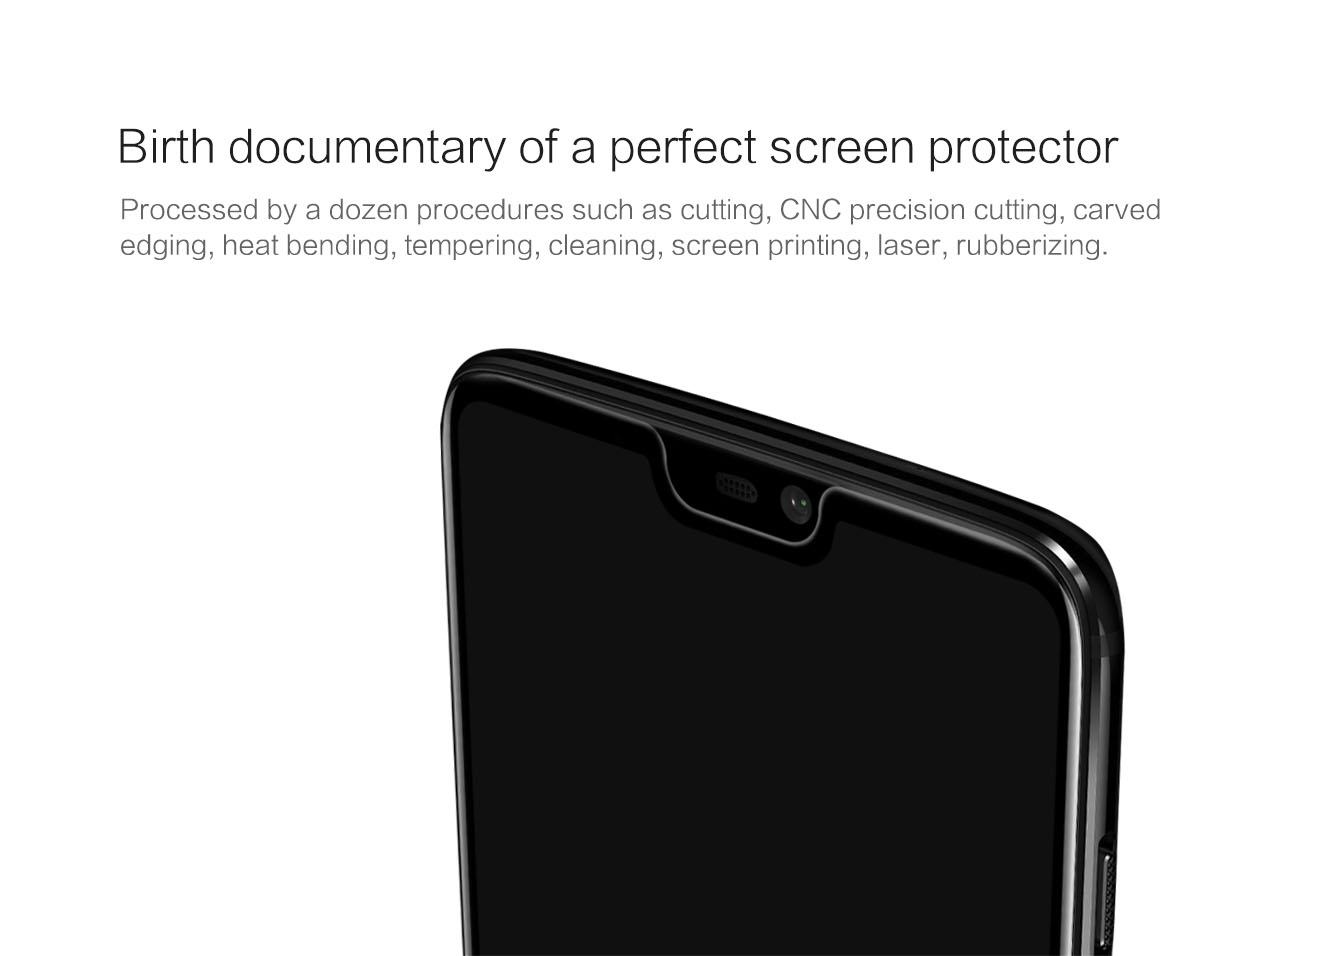 OnePlus 6 screen protector